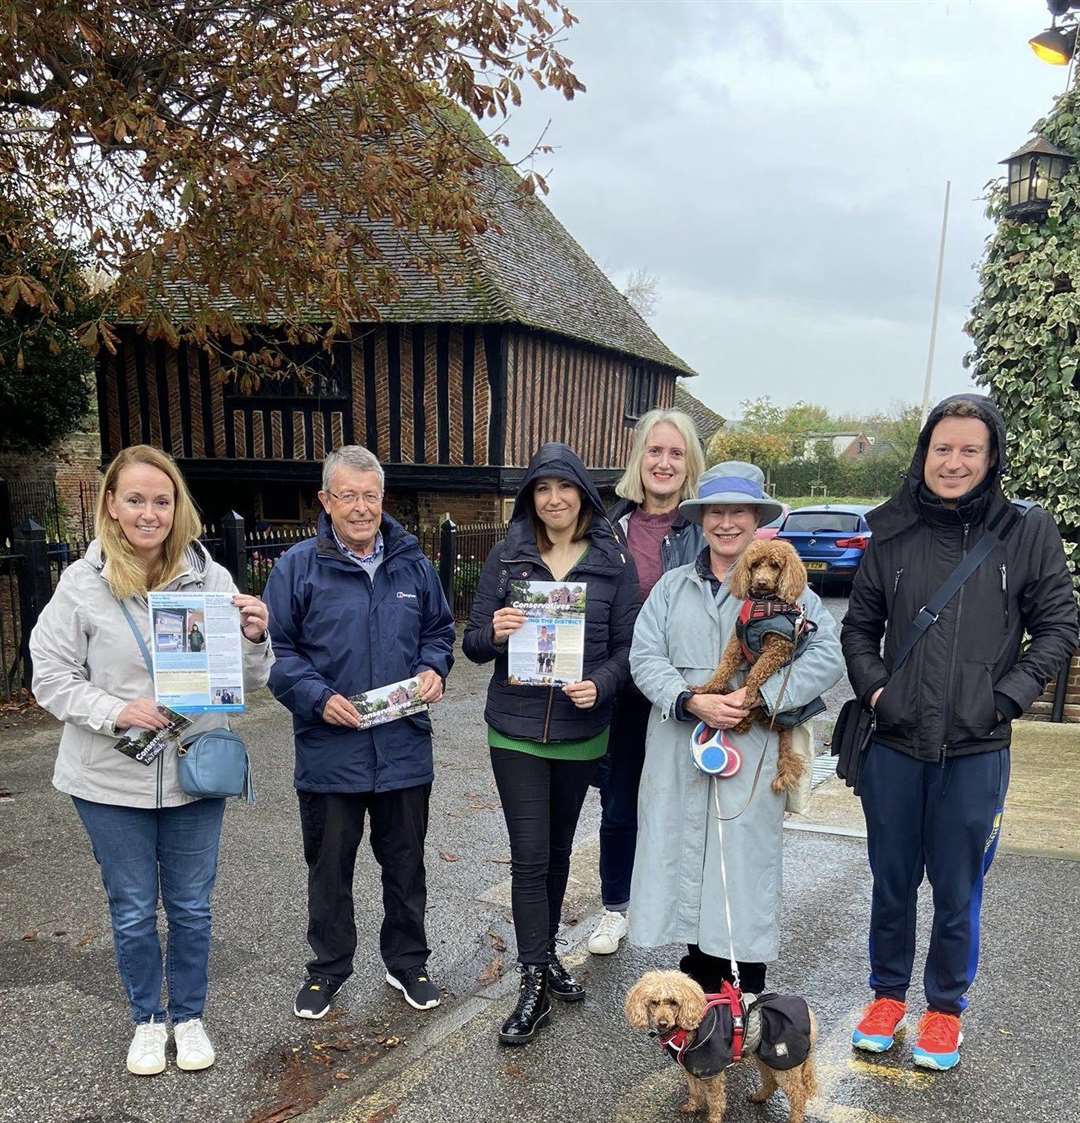 Some of Canterbury's councillors had been out campaigning. Picture: Hilary Scott/Twitter